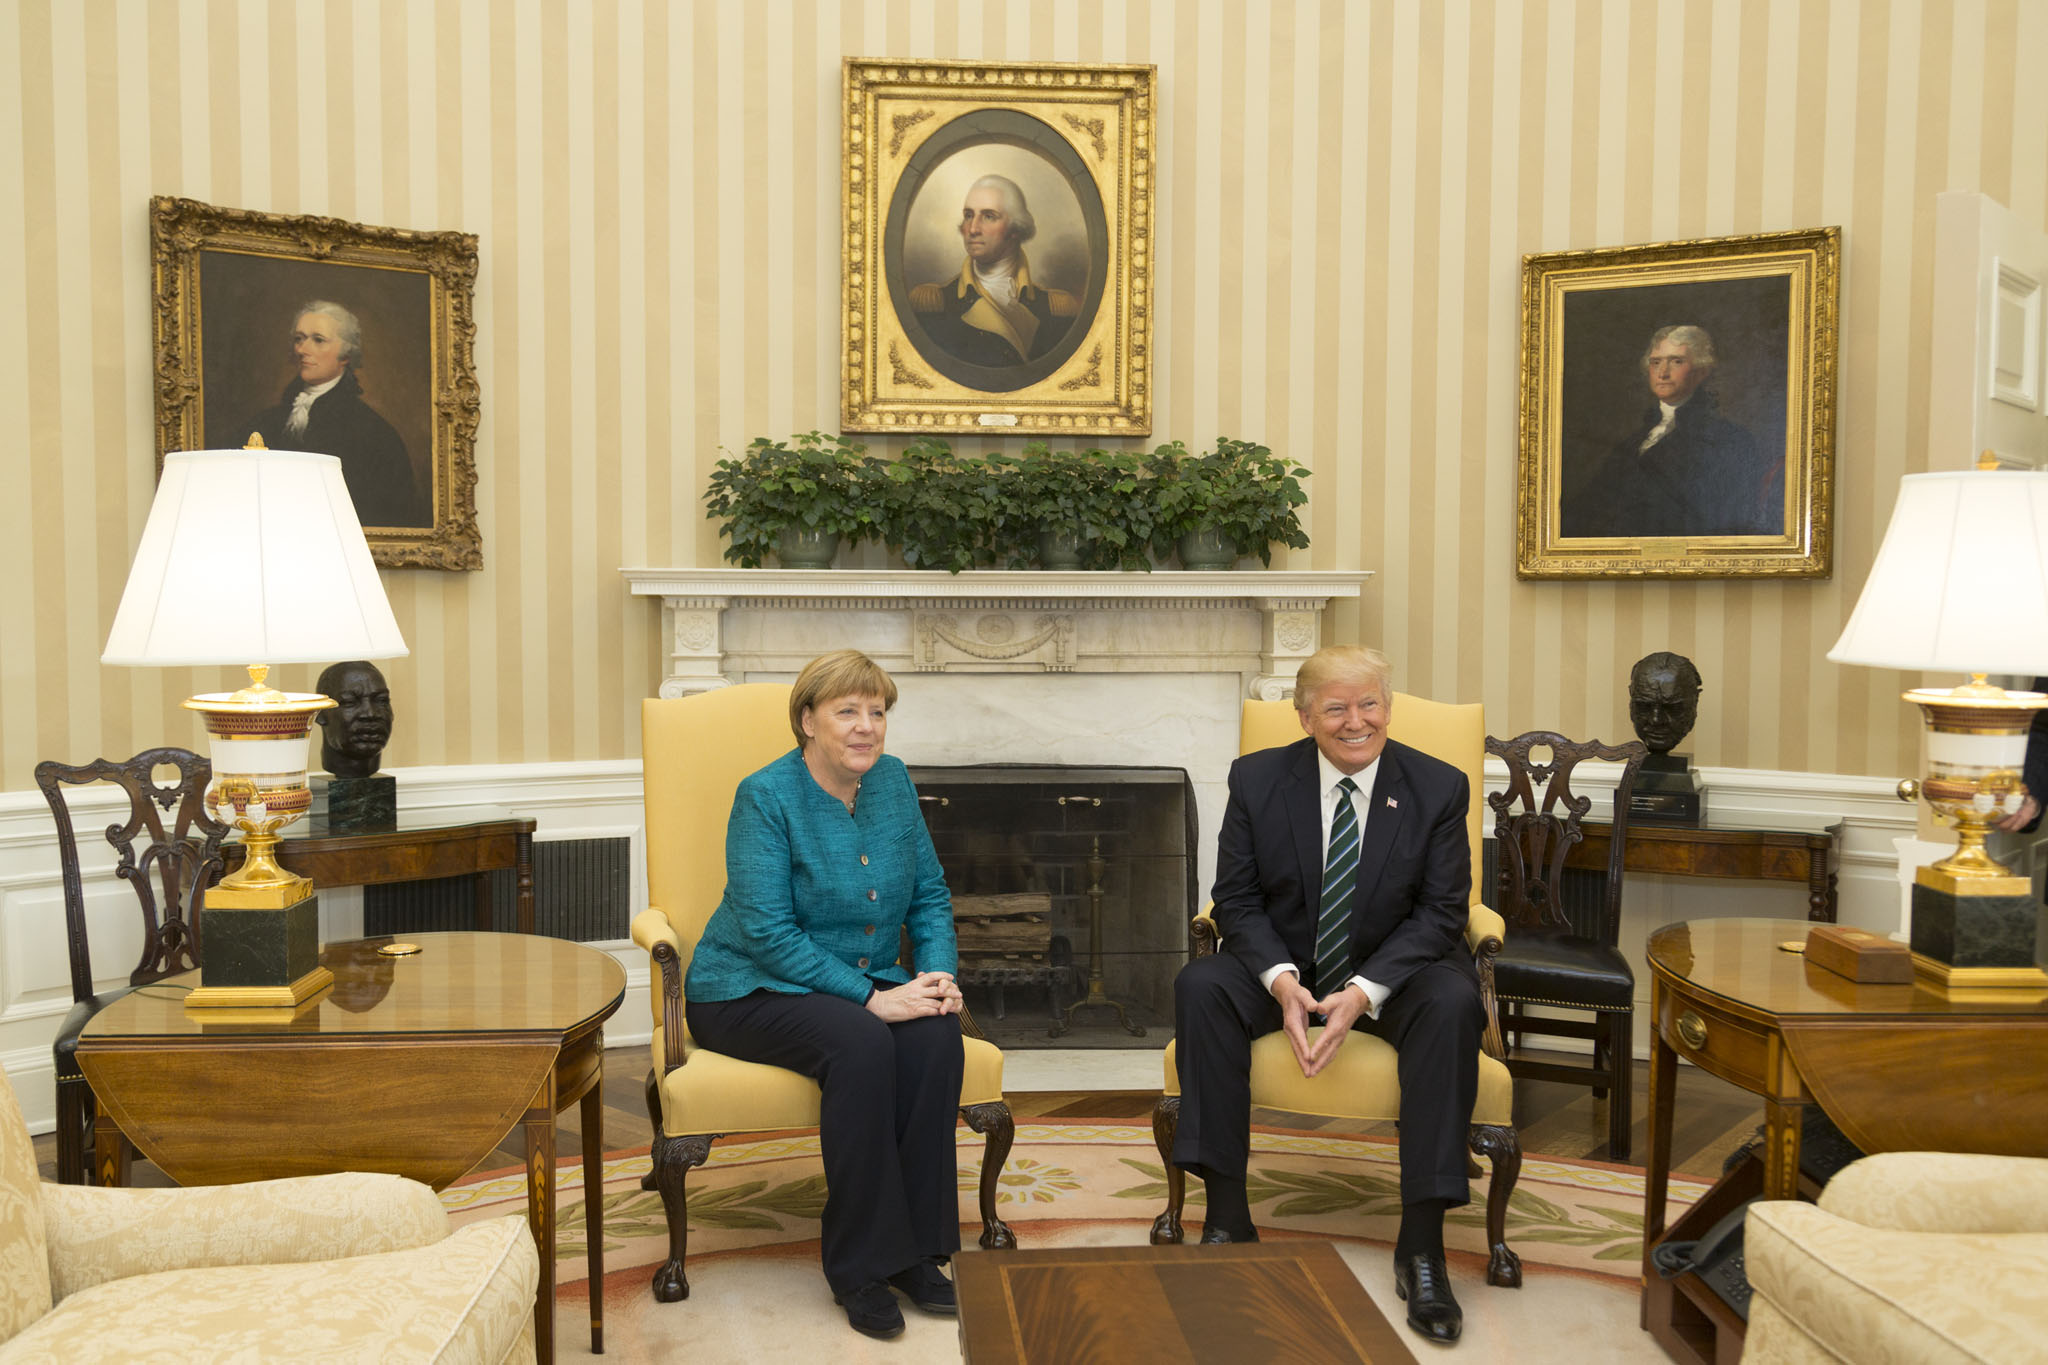 Angela Merkel and Donald Trump in the Oval Office, March 2017